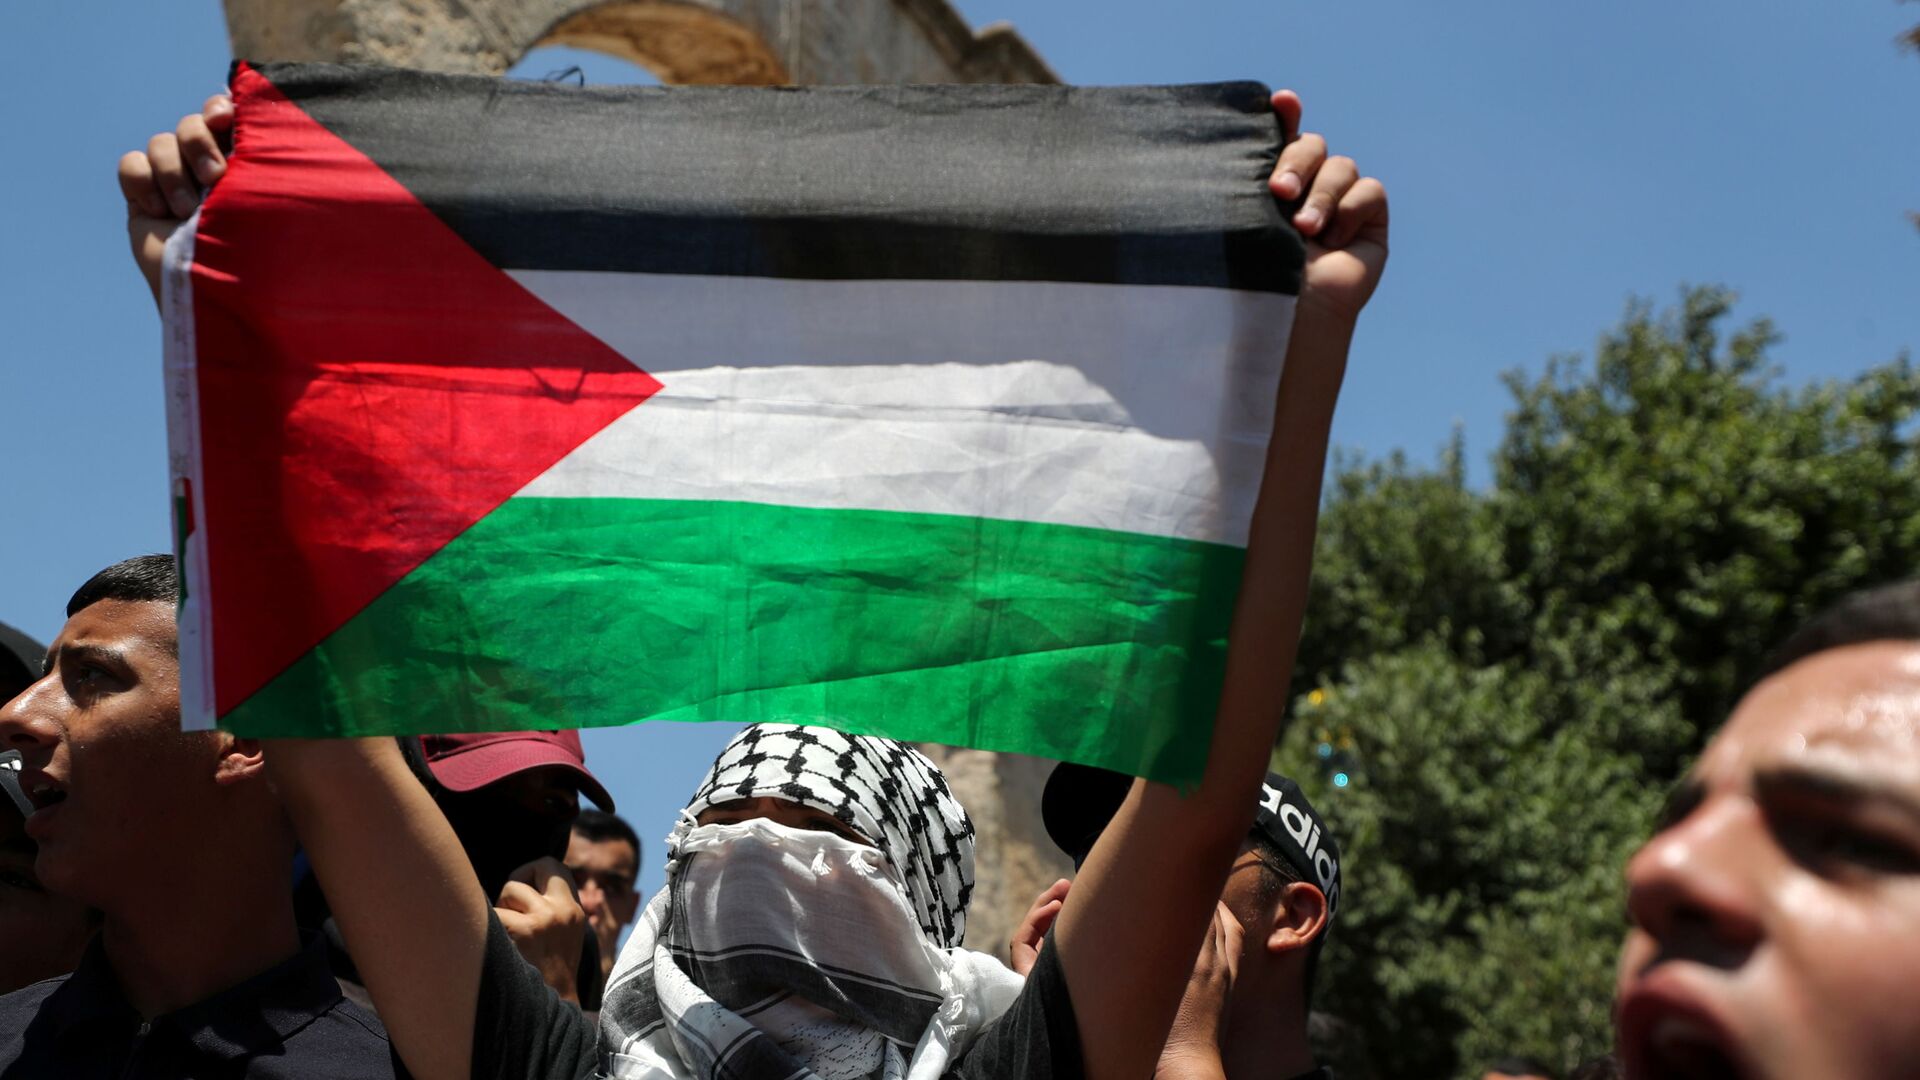 A demonstrator holds a Palestinian flag during a protest over the death of Nizar Banat, at the compound that houses Al-Aqsa Mosque, known to Muslims as Noble Sanctuary and to Jews as Temple Mount, in Jerusalem's Old City, June 25, 2021. - Sputnik International, 1920, 29.06.2021